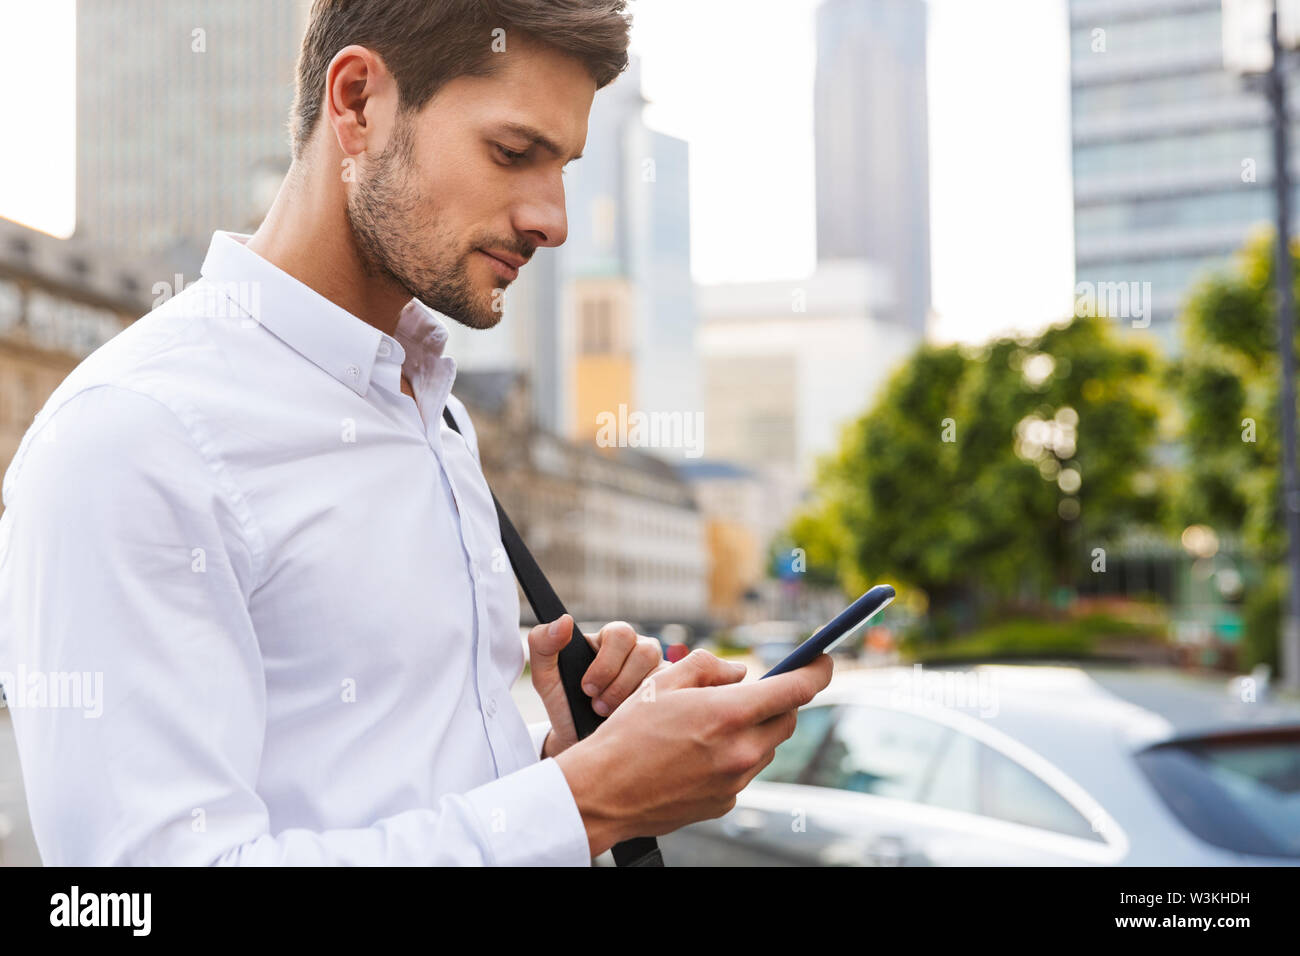 Image of a serious young businessman walking by street using mobile phone chatting. Stock Photo